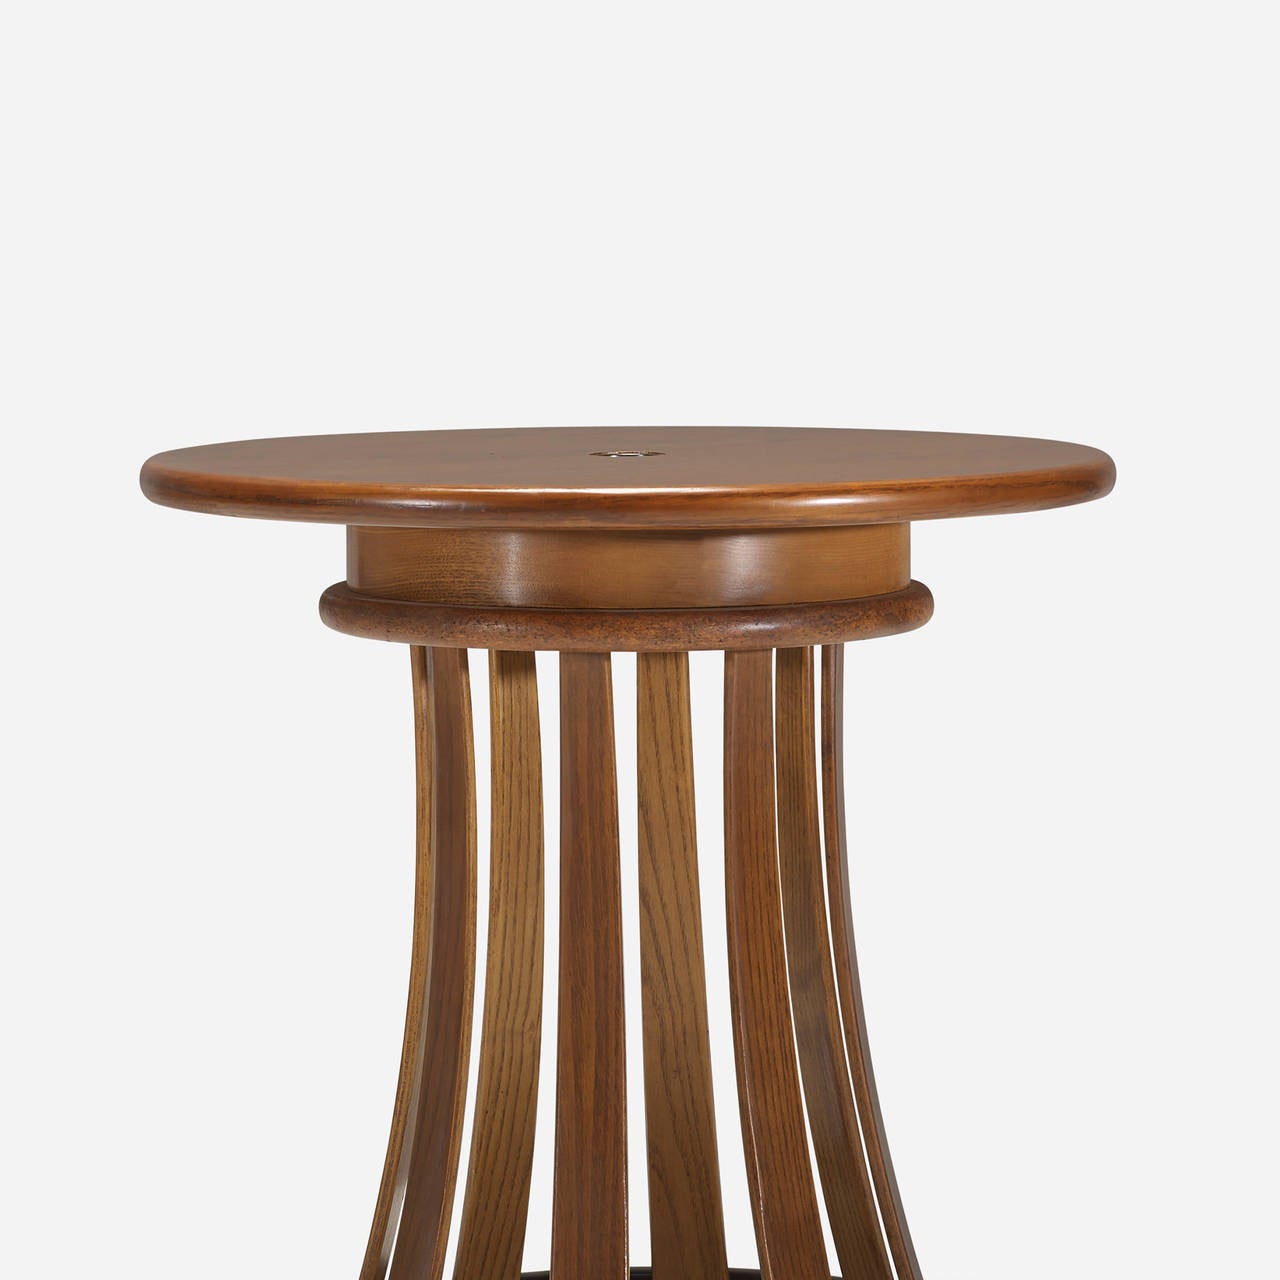 Toad stool occasional table by Edward Wormley for Dunbar.